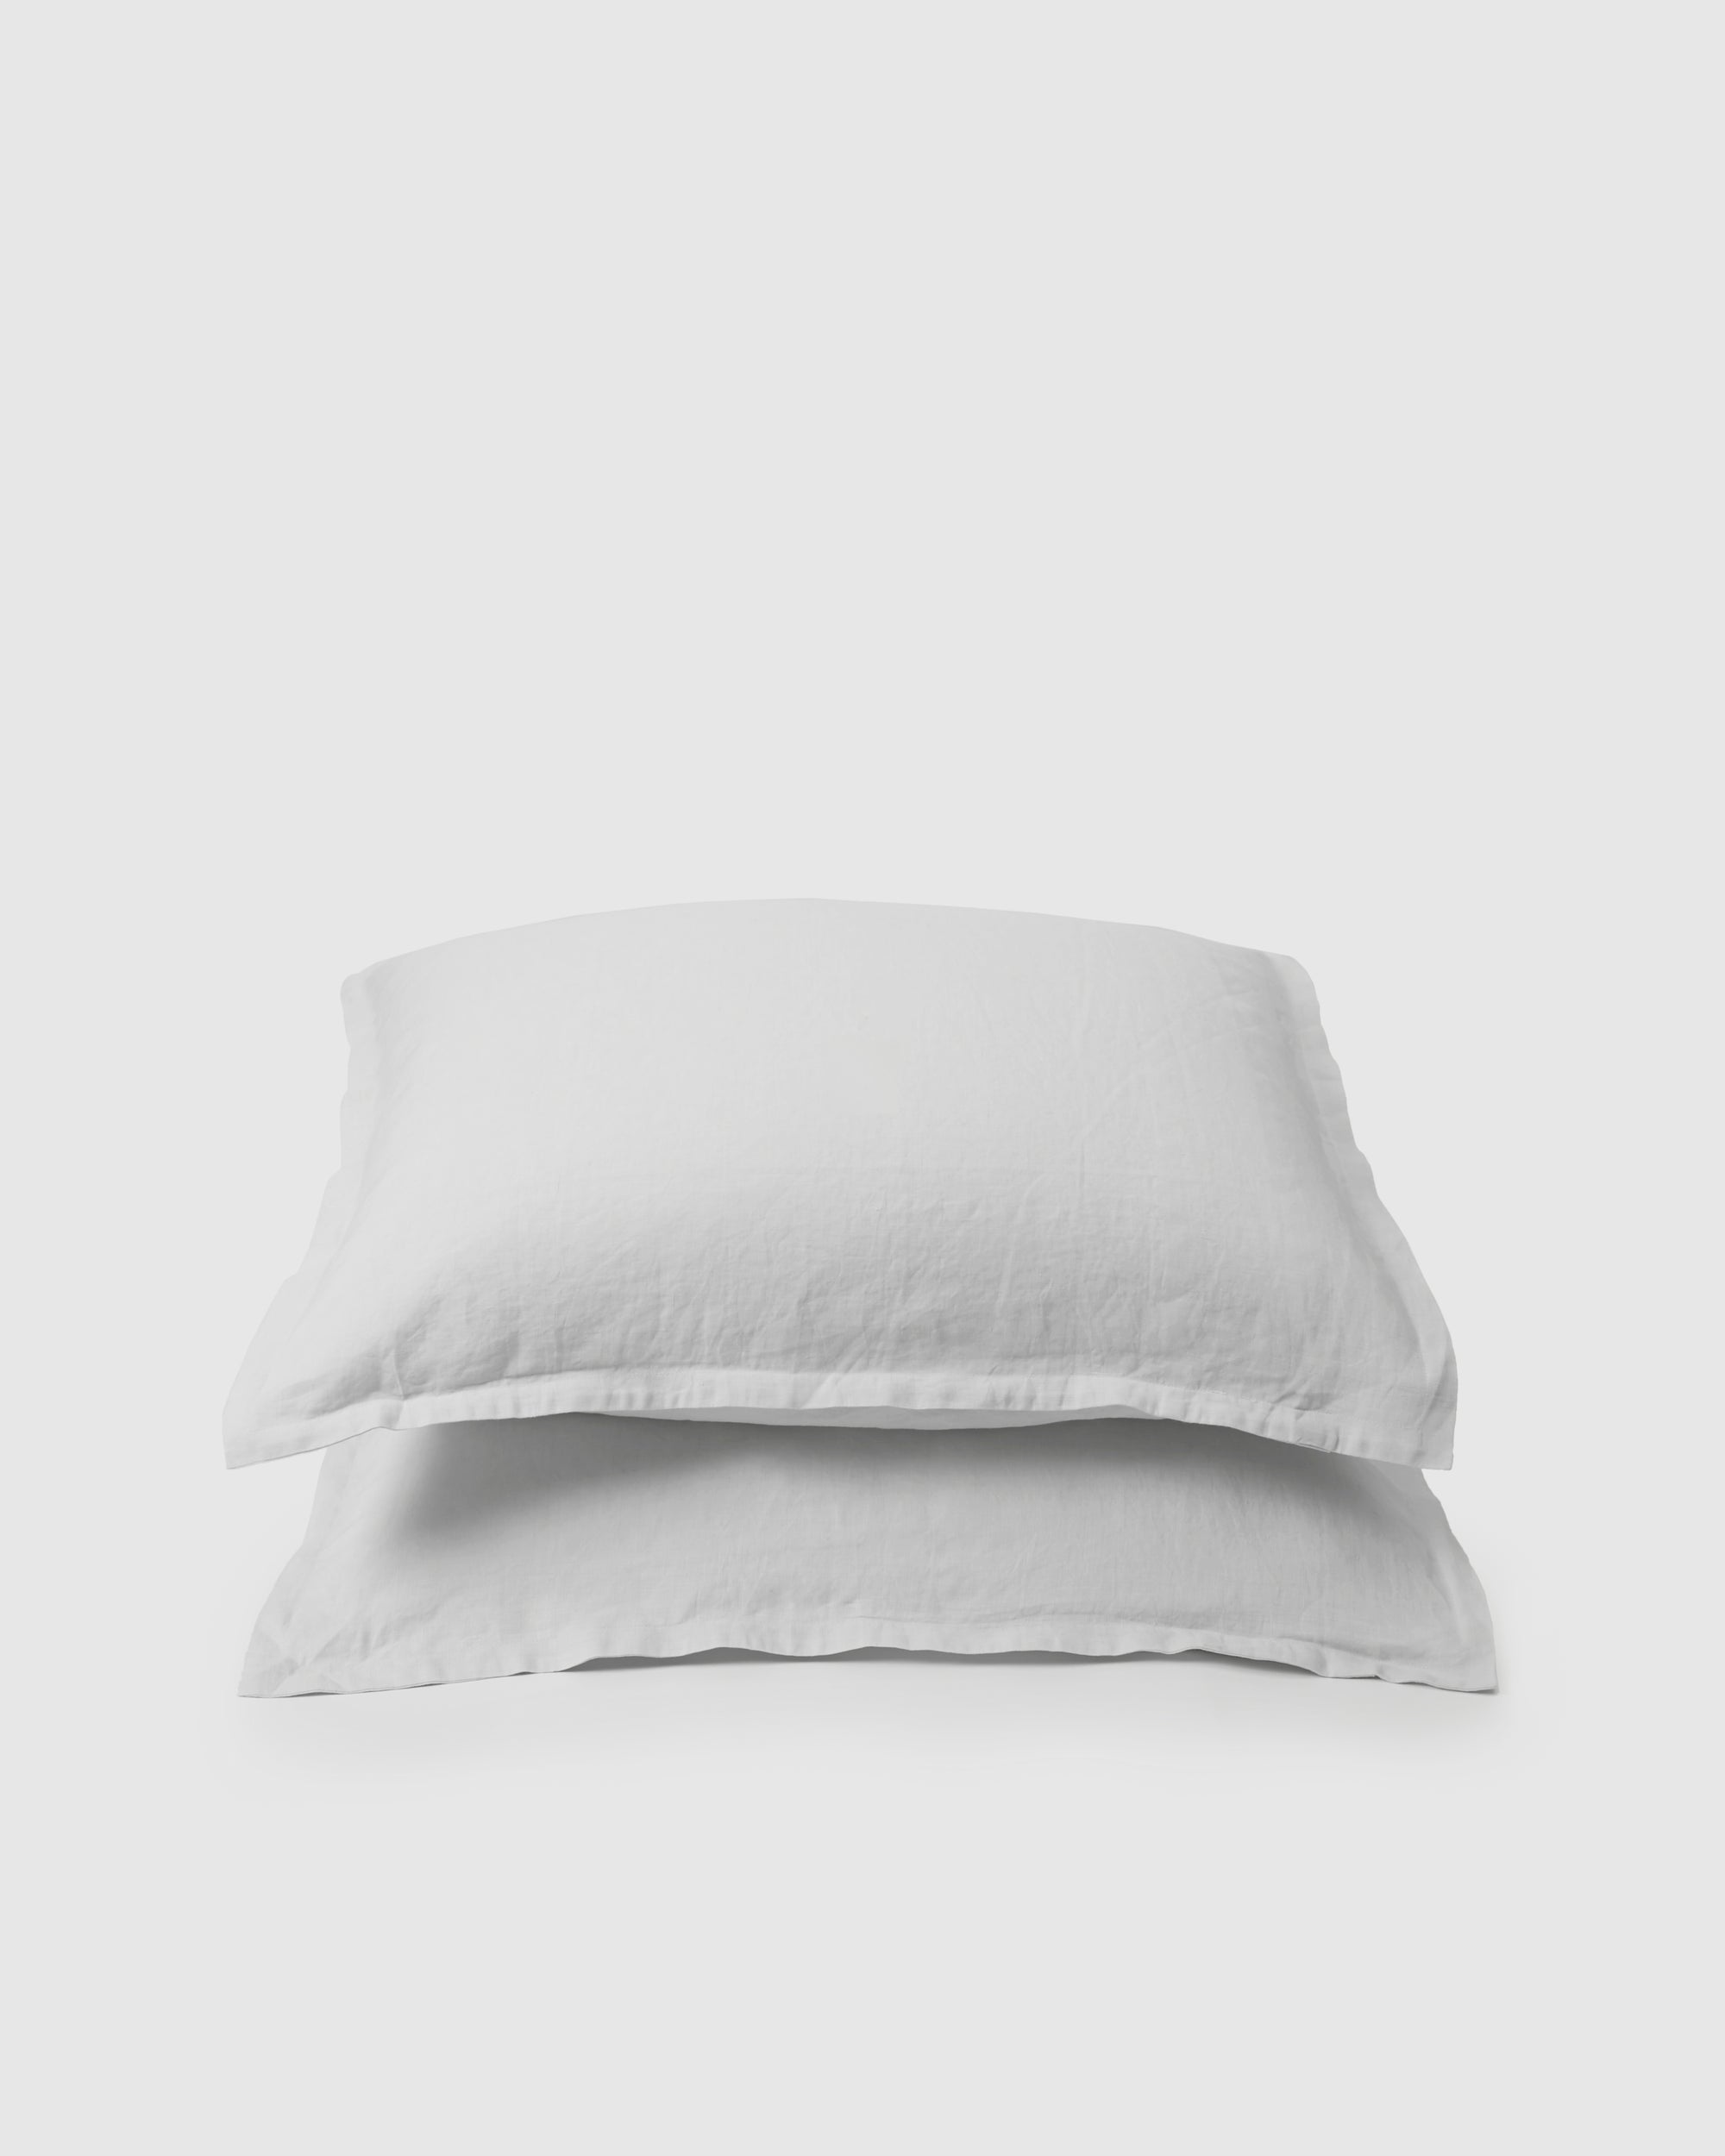 Pair of filled pillowcases in creamy white milk